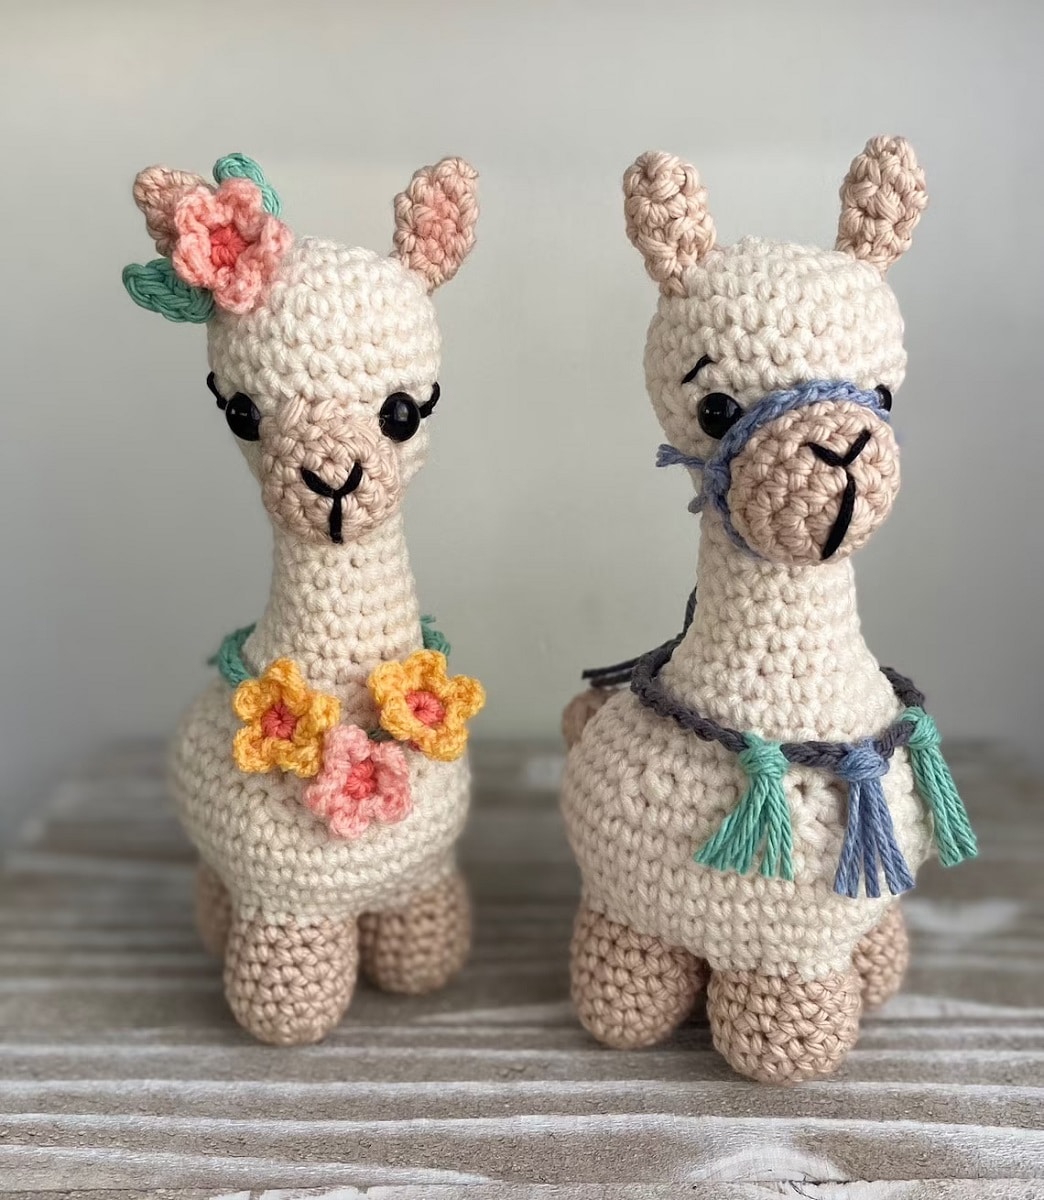 Two cream crochet llamas with light brown ears and legs. One llama has orange and pink flowers around its neck and the other blue and green tassels.